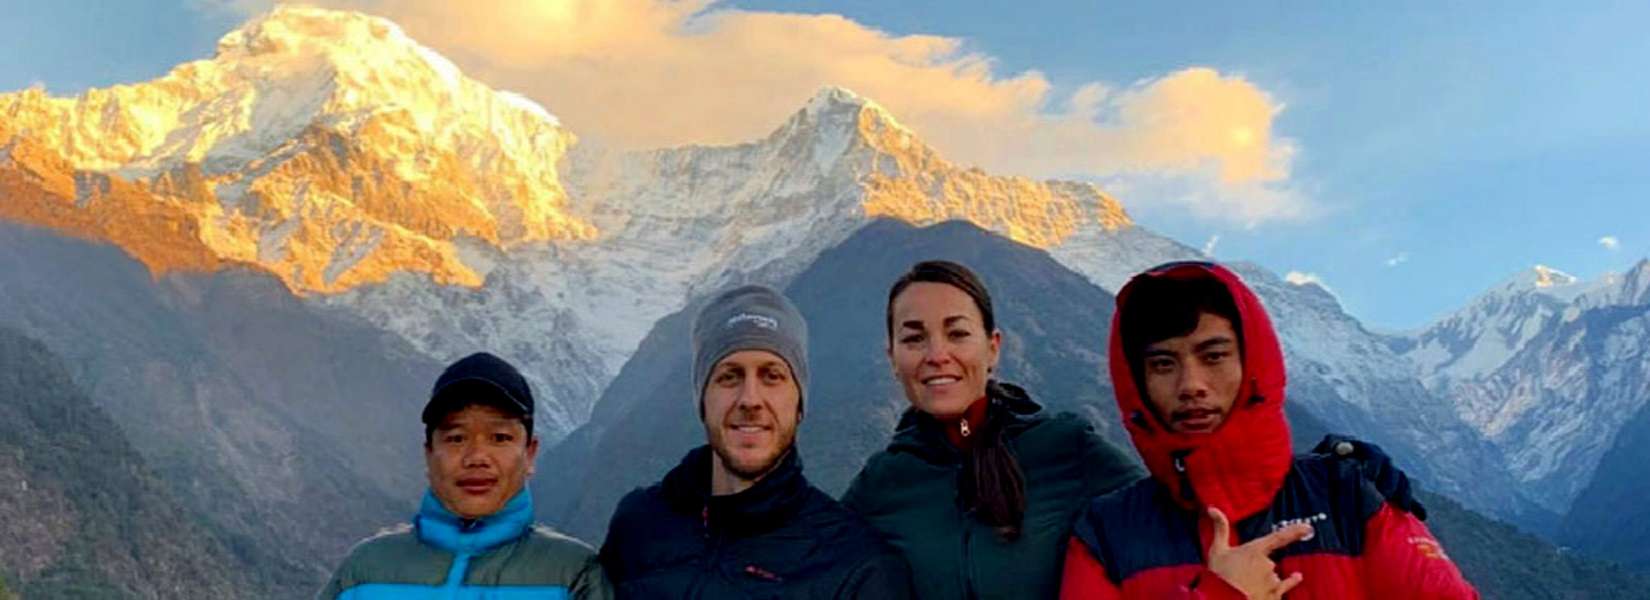 Annapurna Base Camp Trek Fixed Departure, Itinerary and prices in March, April & May